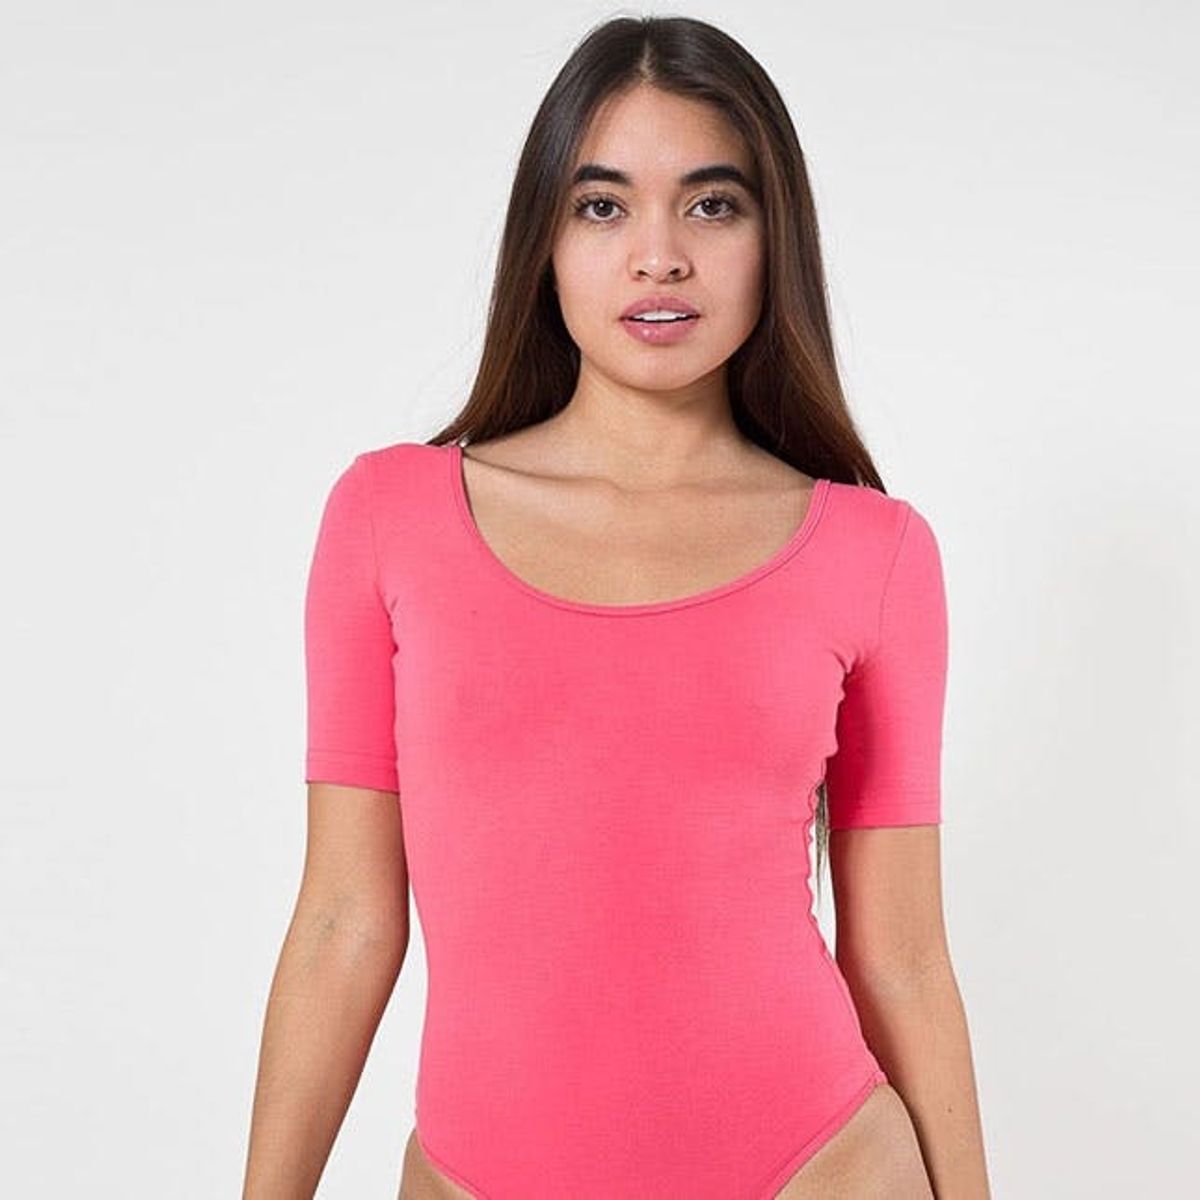 The 13 Best Things We Ever Bought from American Apparel